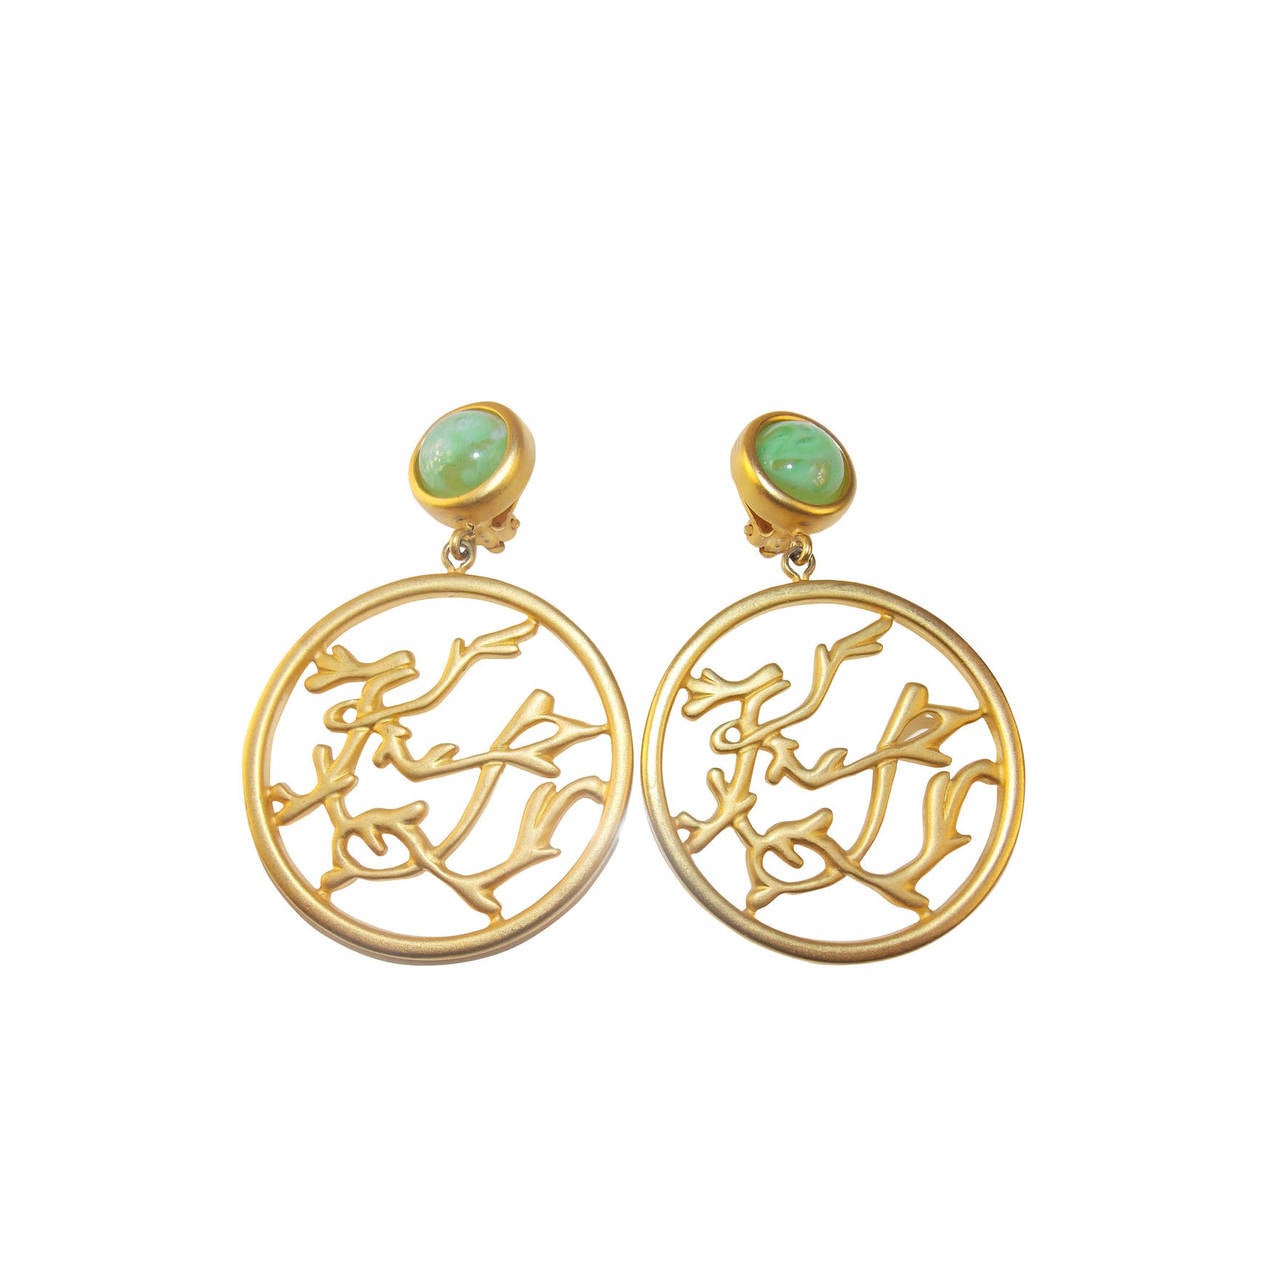 Karl Lagerfeld Gold Turquoise Cabochon Clip Earrings